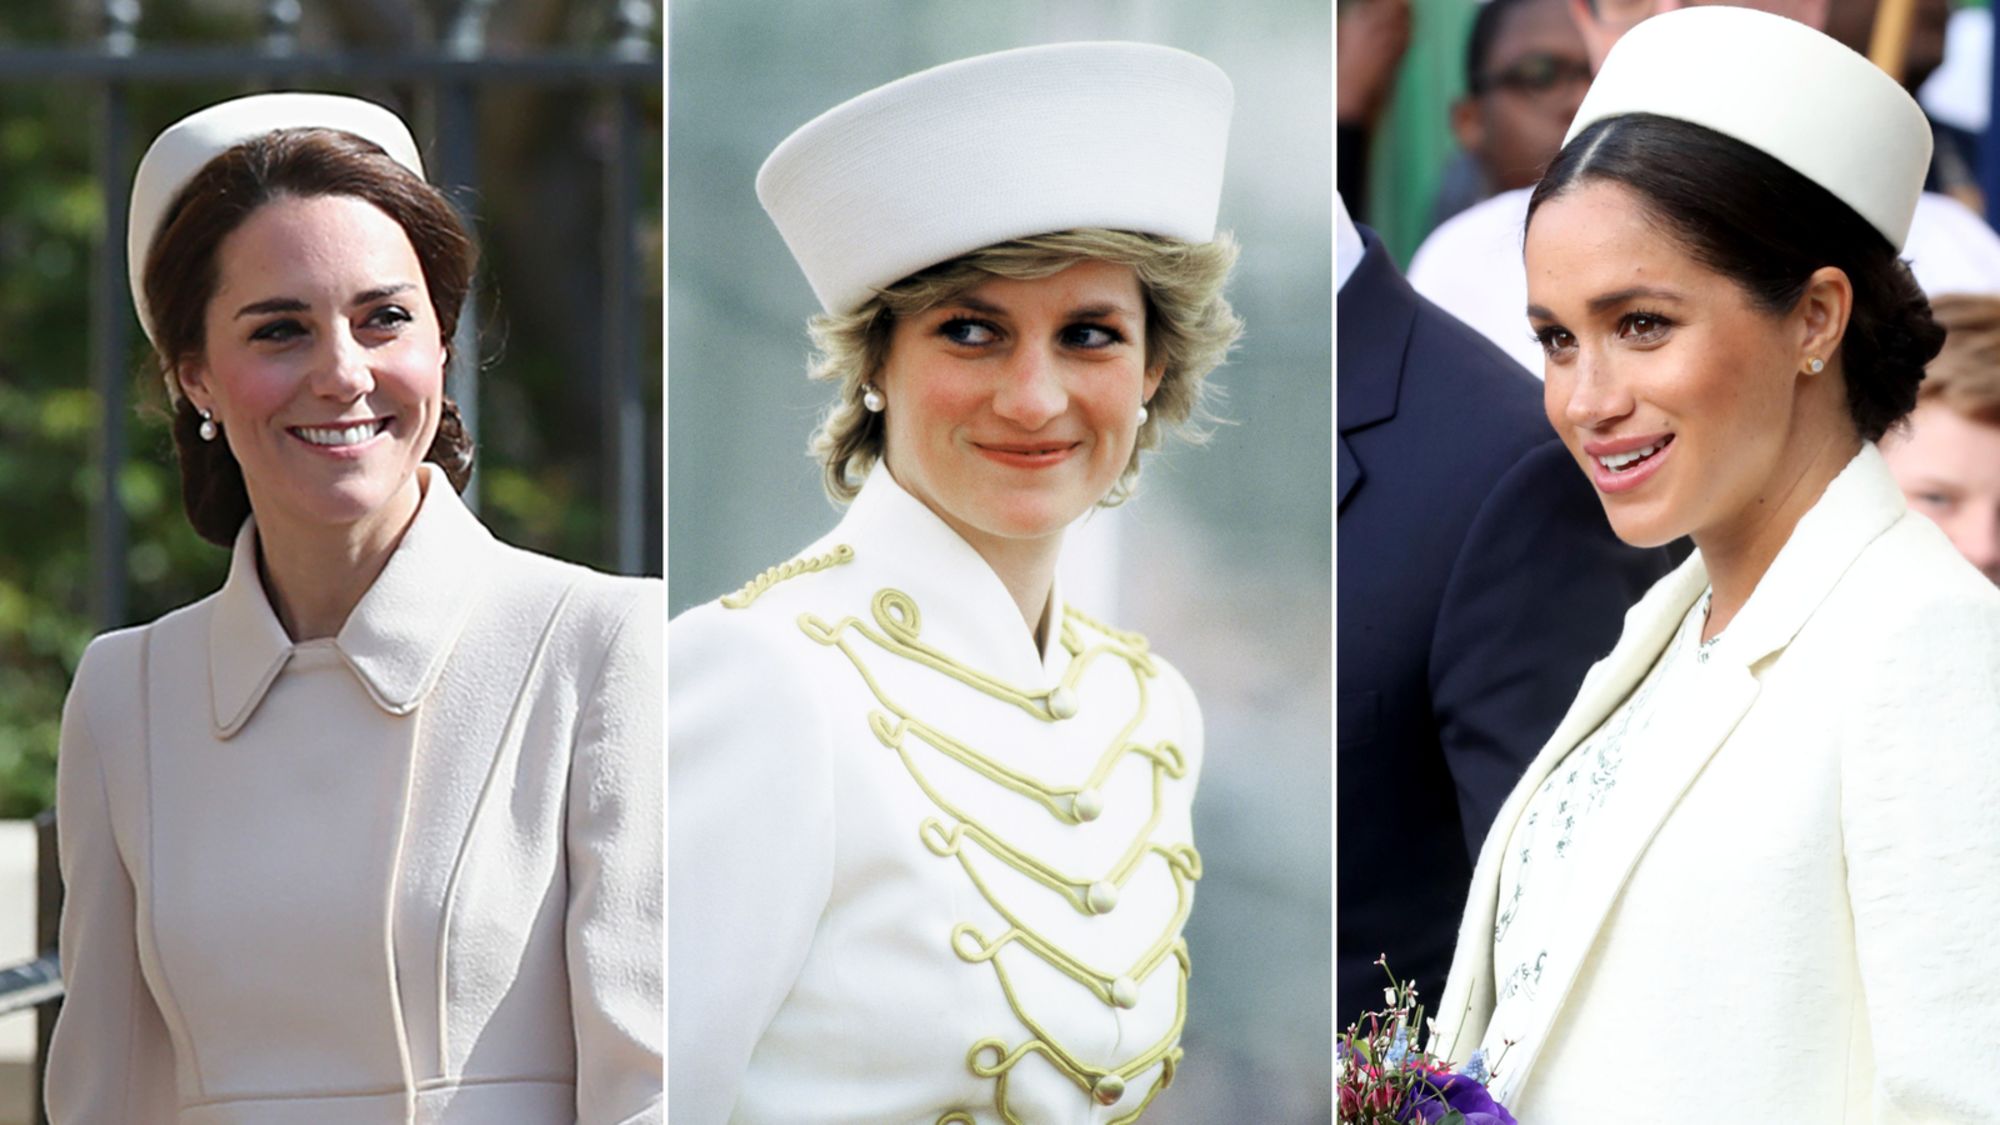 Kate Middleton and Meghan Markle Both Wear All-White Suits